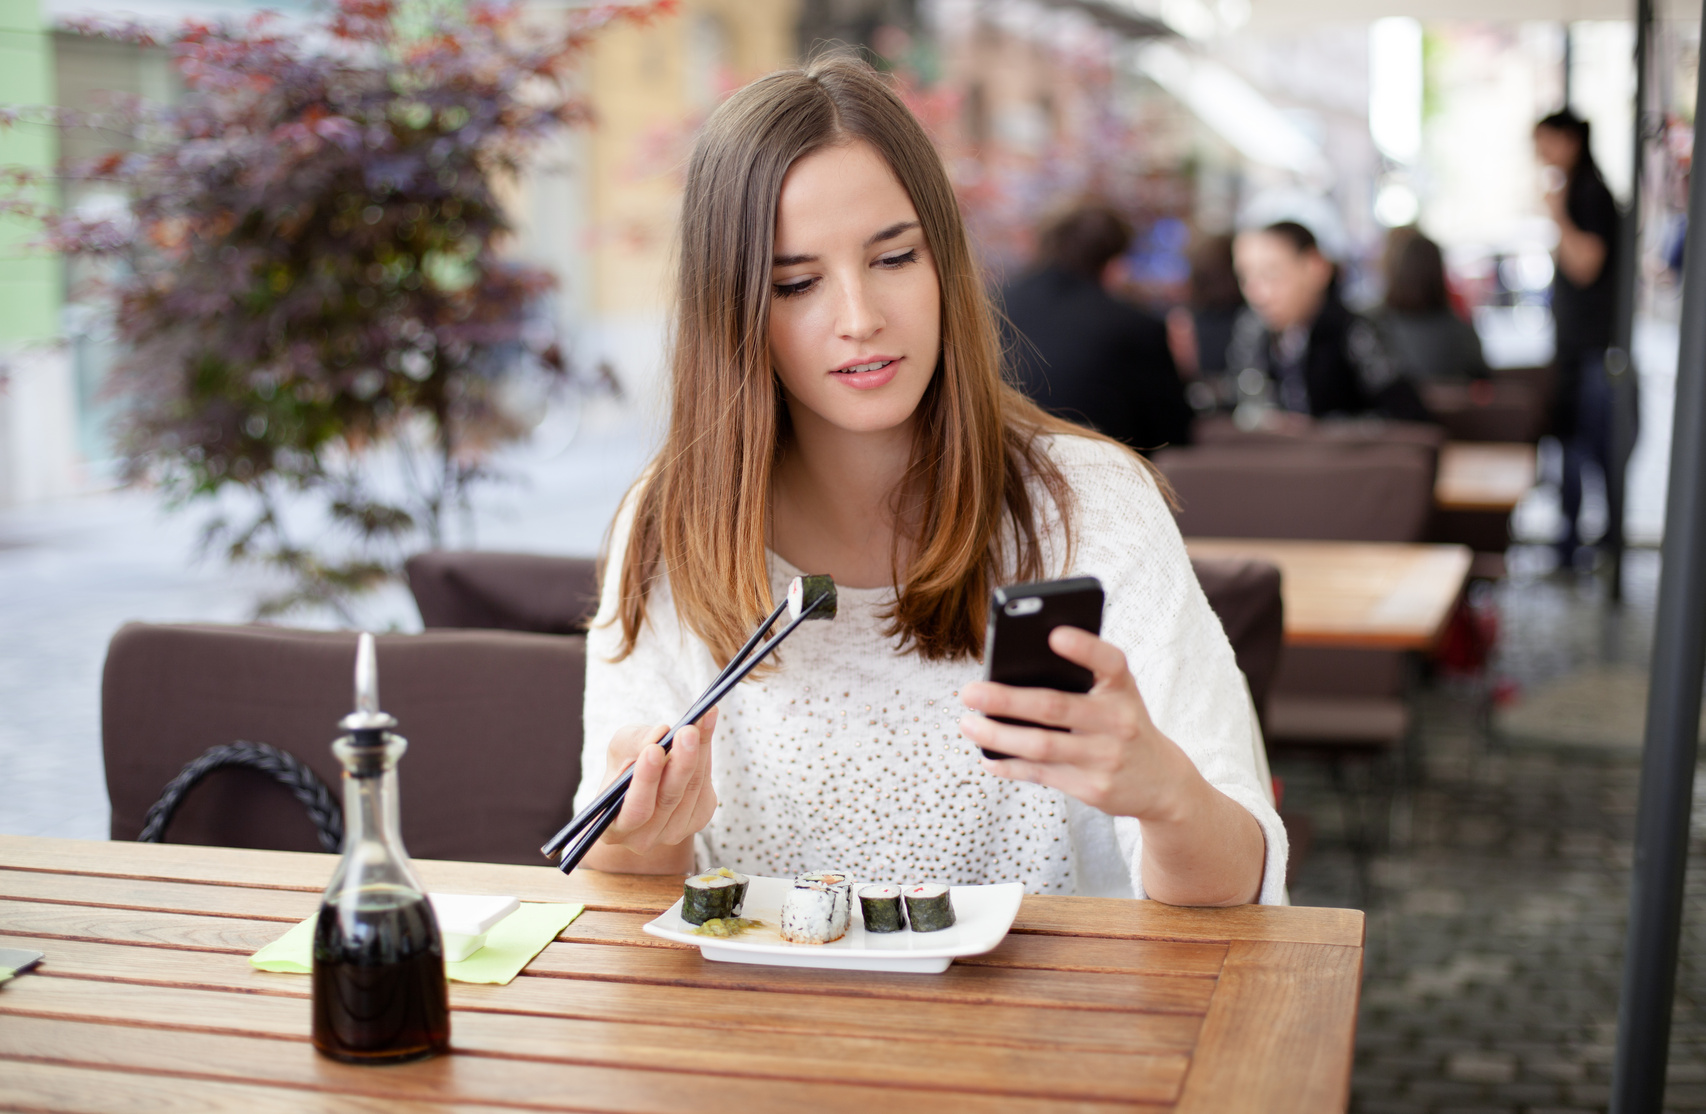 Young woman reading a message while eating sushi in a restaurant